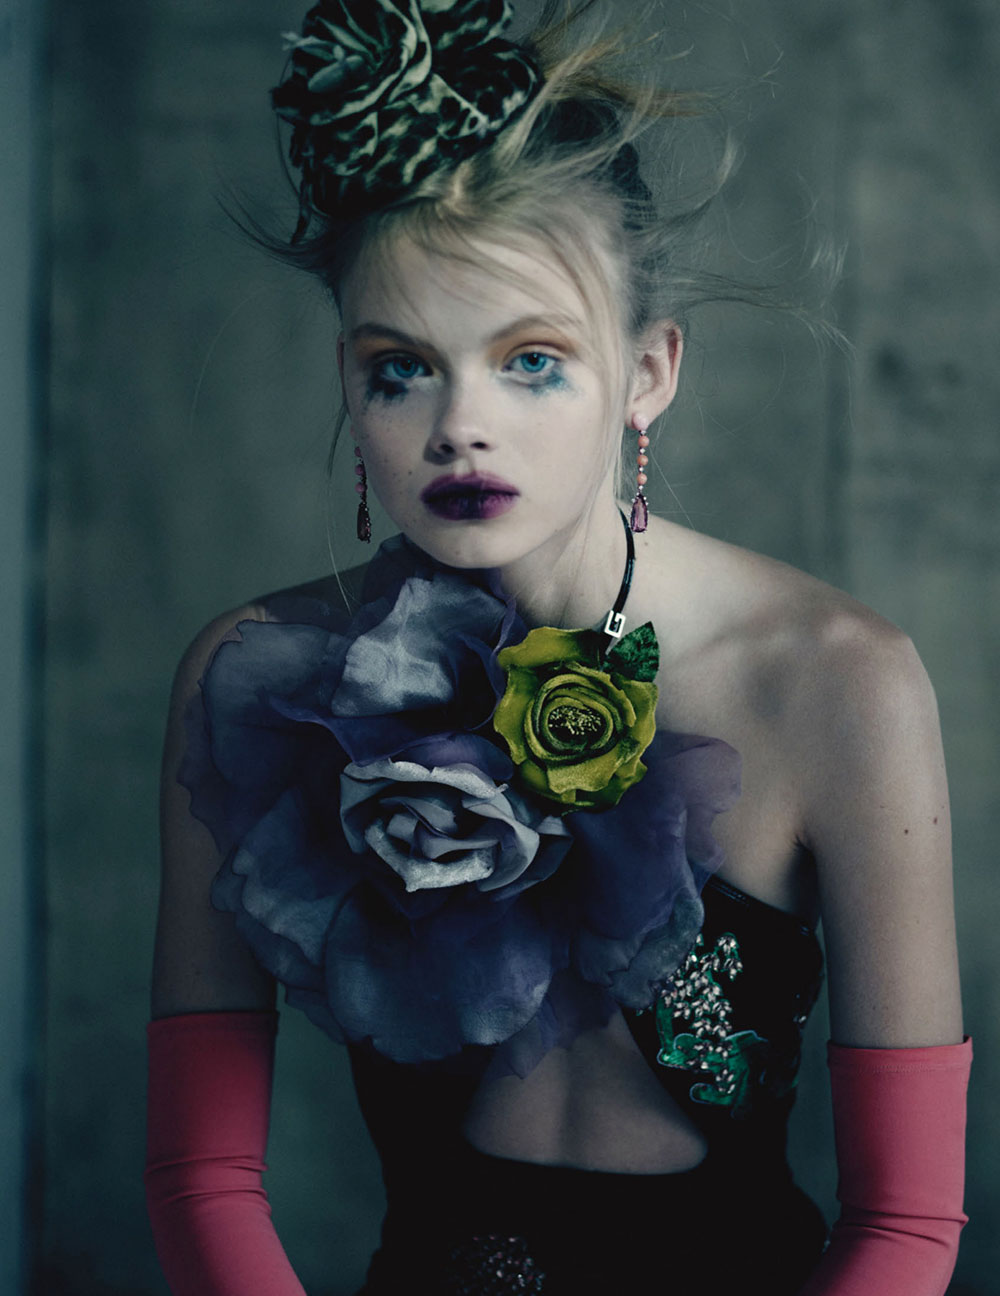 Evie Harris and Tess McMillan by Paolo Roversi for British Vogue June 2020